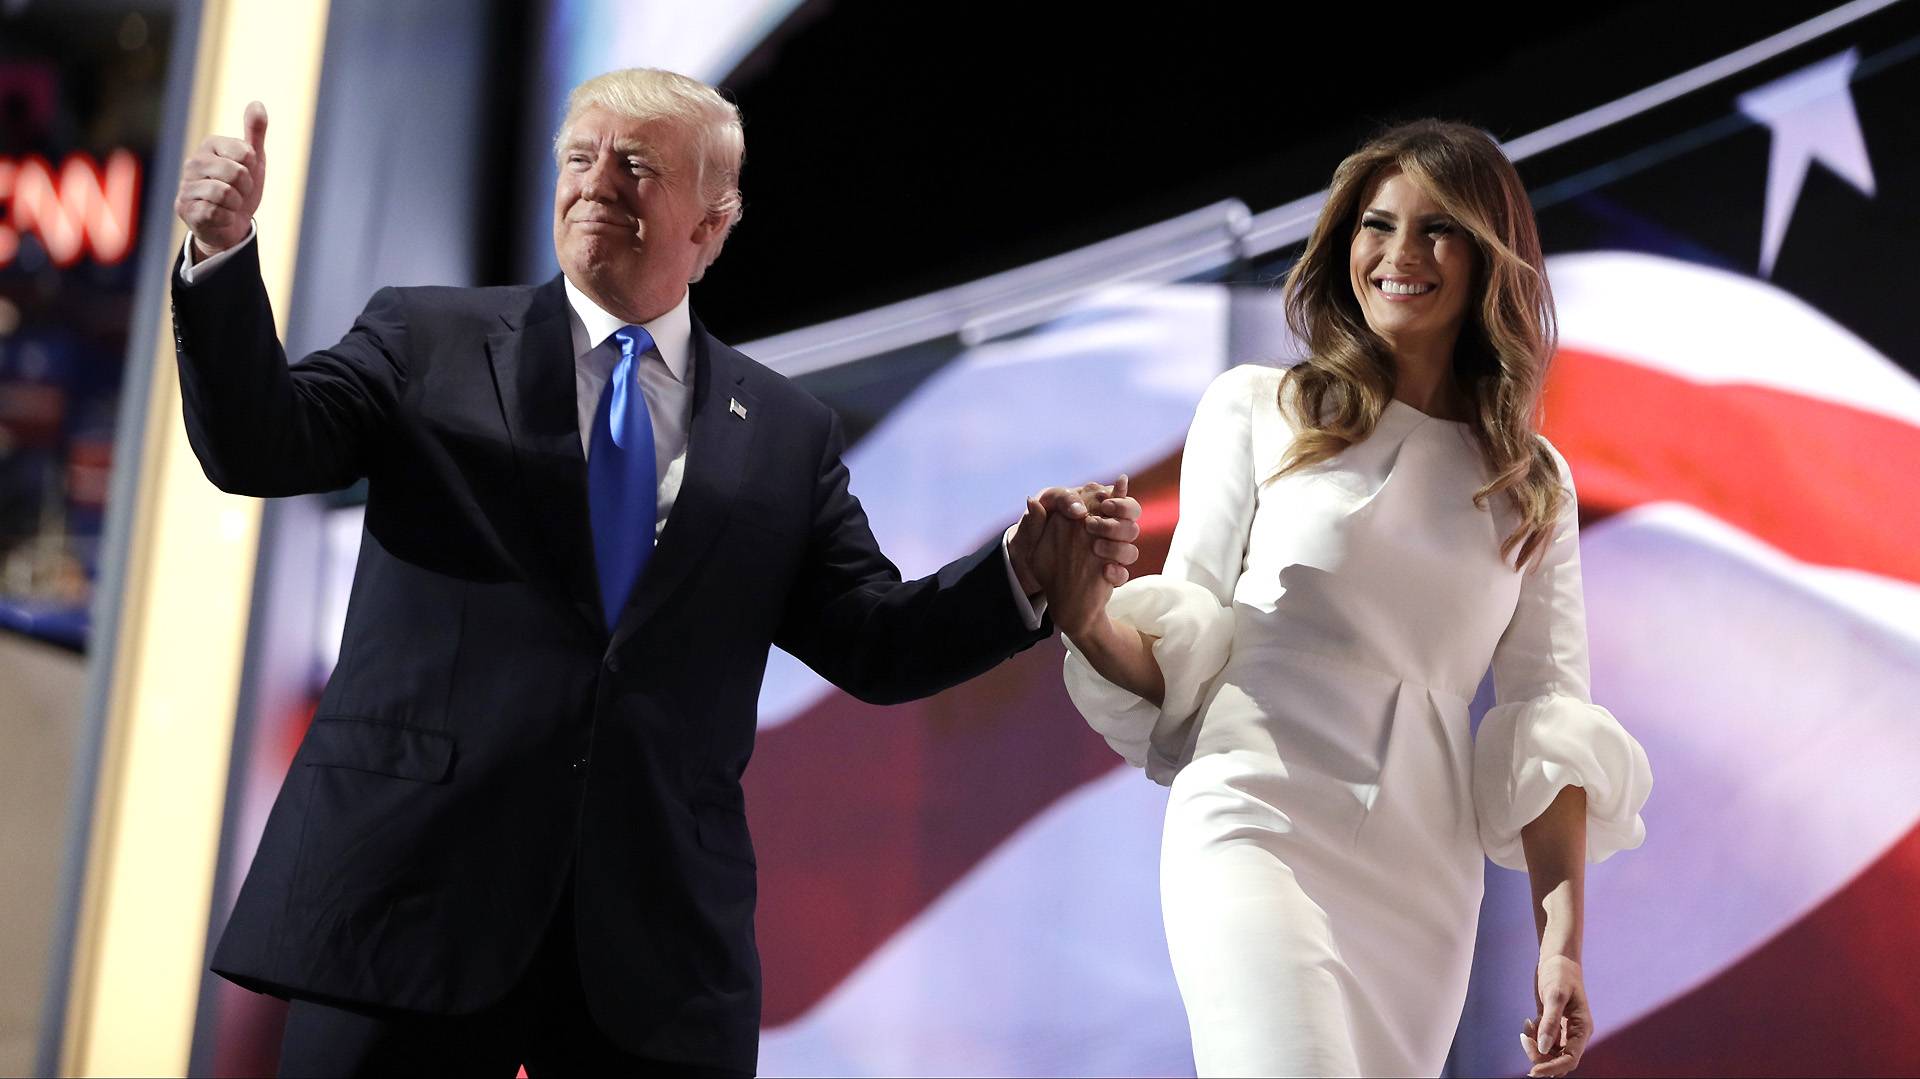 Republican presidential candidate Donald Trump gives his thumb up as he walks off the stage with his wife Melania during the Republican National Convention, Monday, July 18, 2016, in Cleveland. (AP Photo/John Locher)